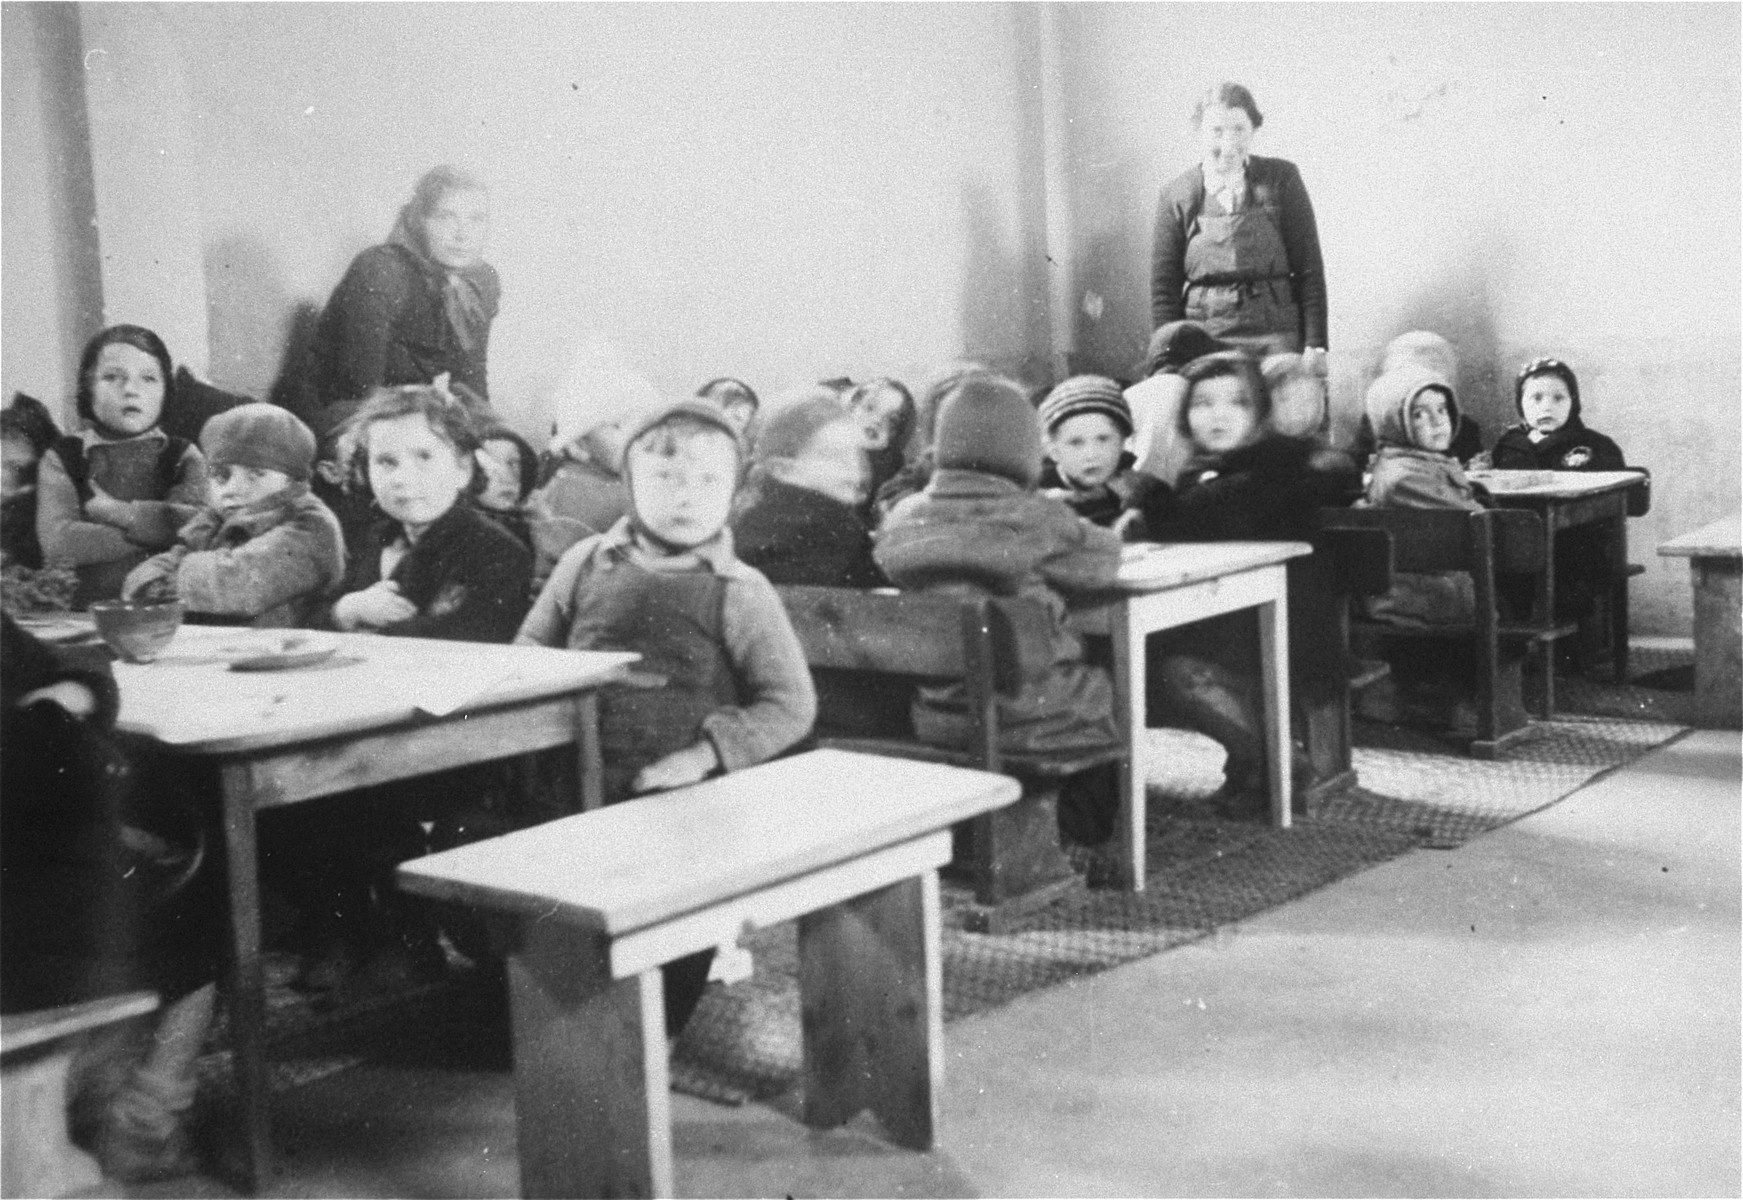 Children cared for by the OSE in the Rivesaltes transit camp.

Herbert Vogel is pictured in the front row.